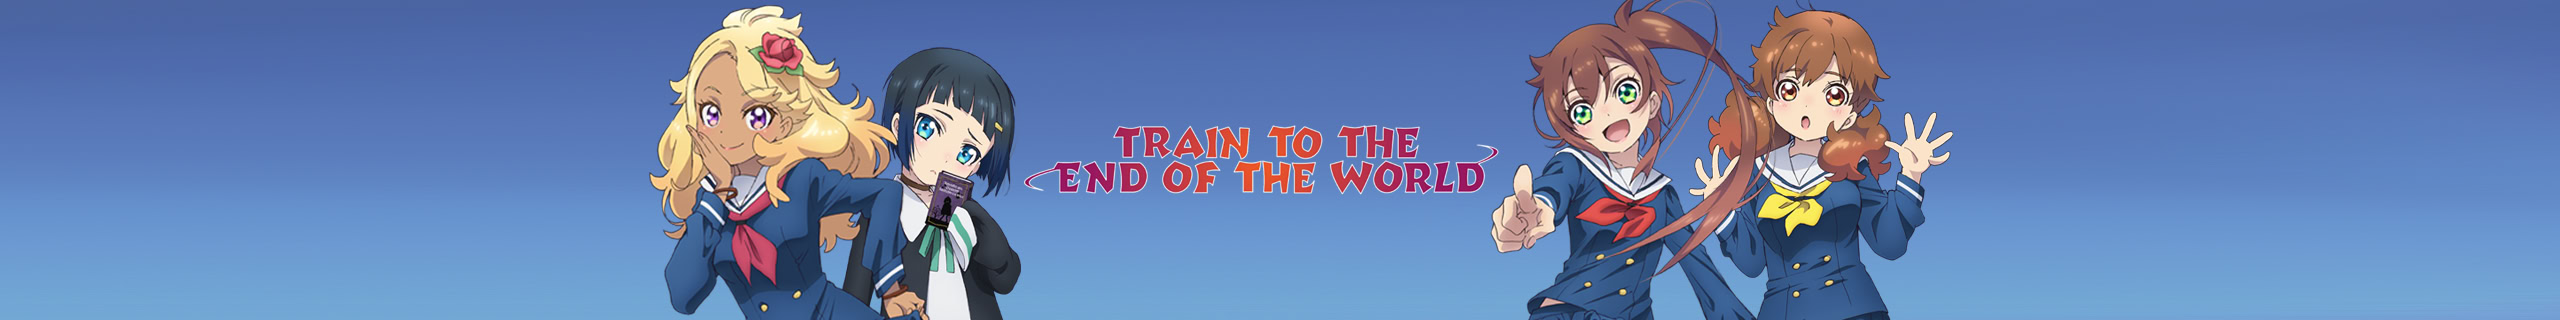 Train to the End of the World Banner